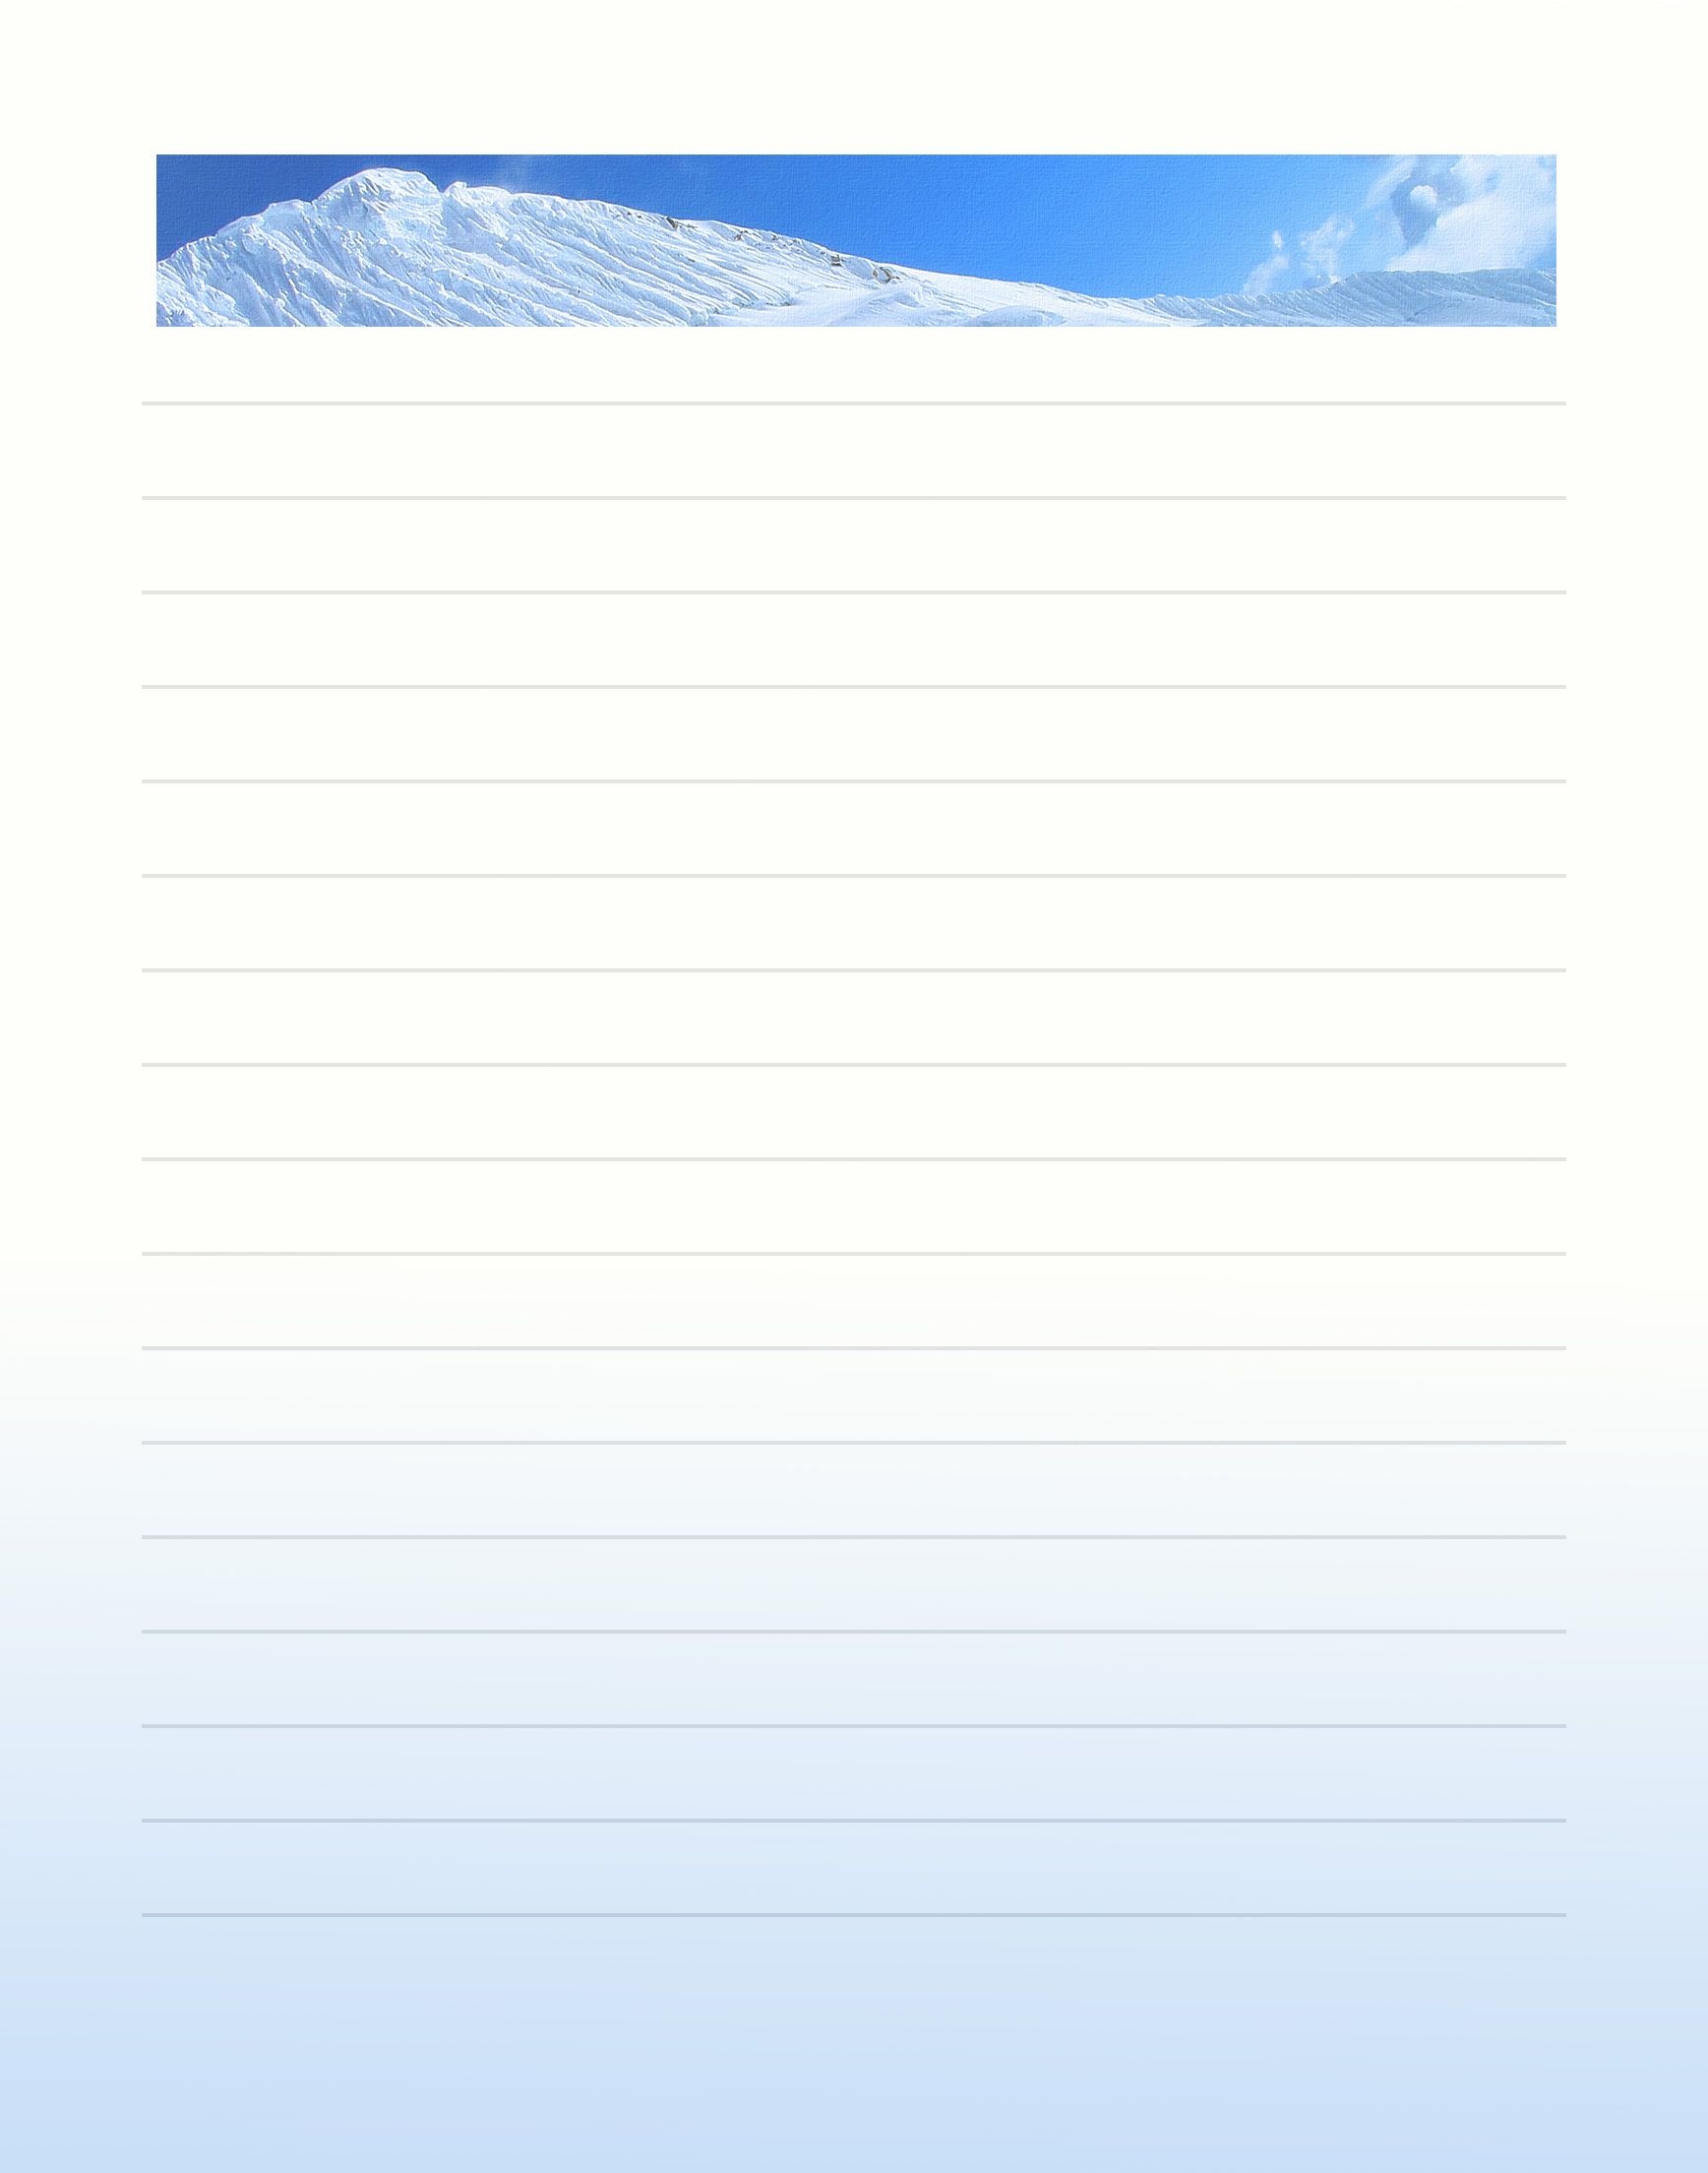 Lined Winter Free Printable Stationary (Stationery) | *stationery - Free Printable Winter Stationery